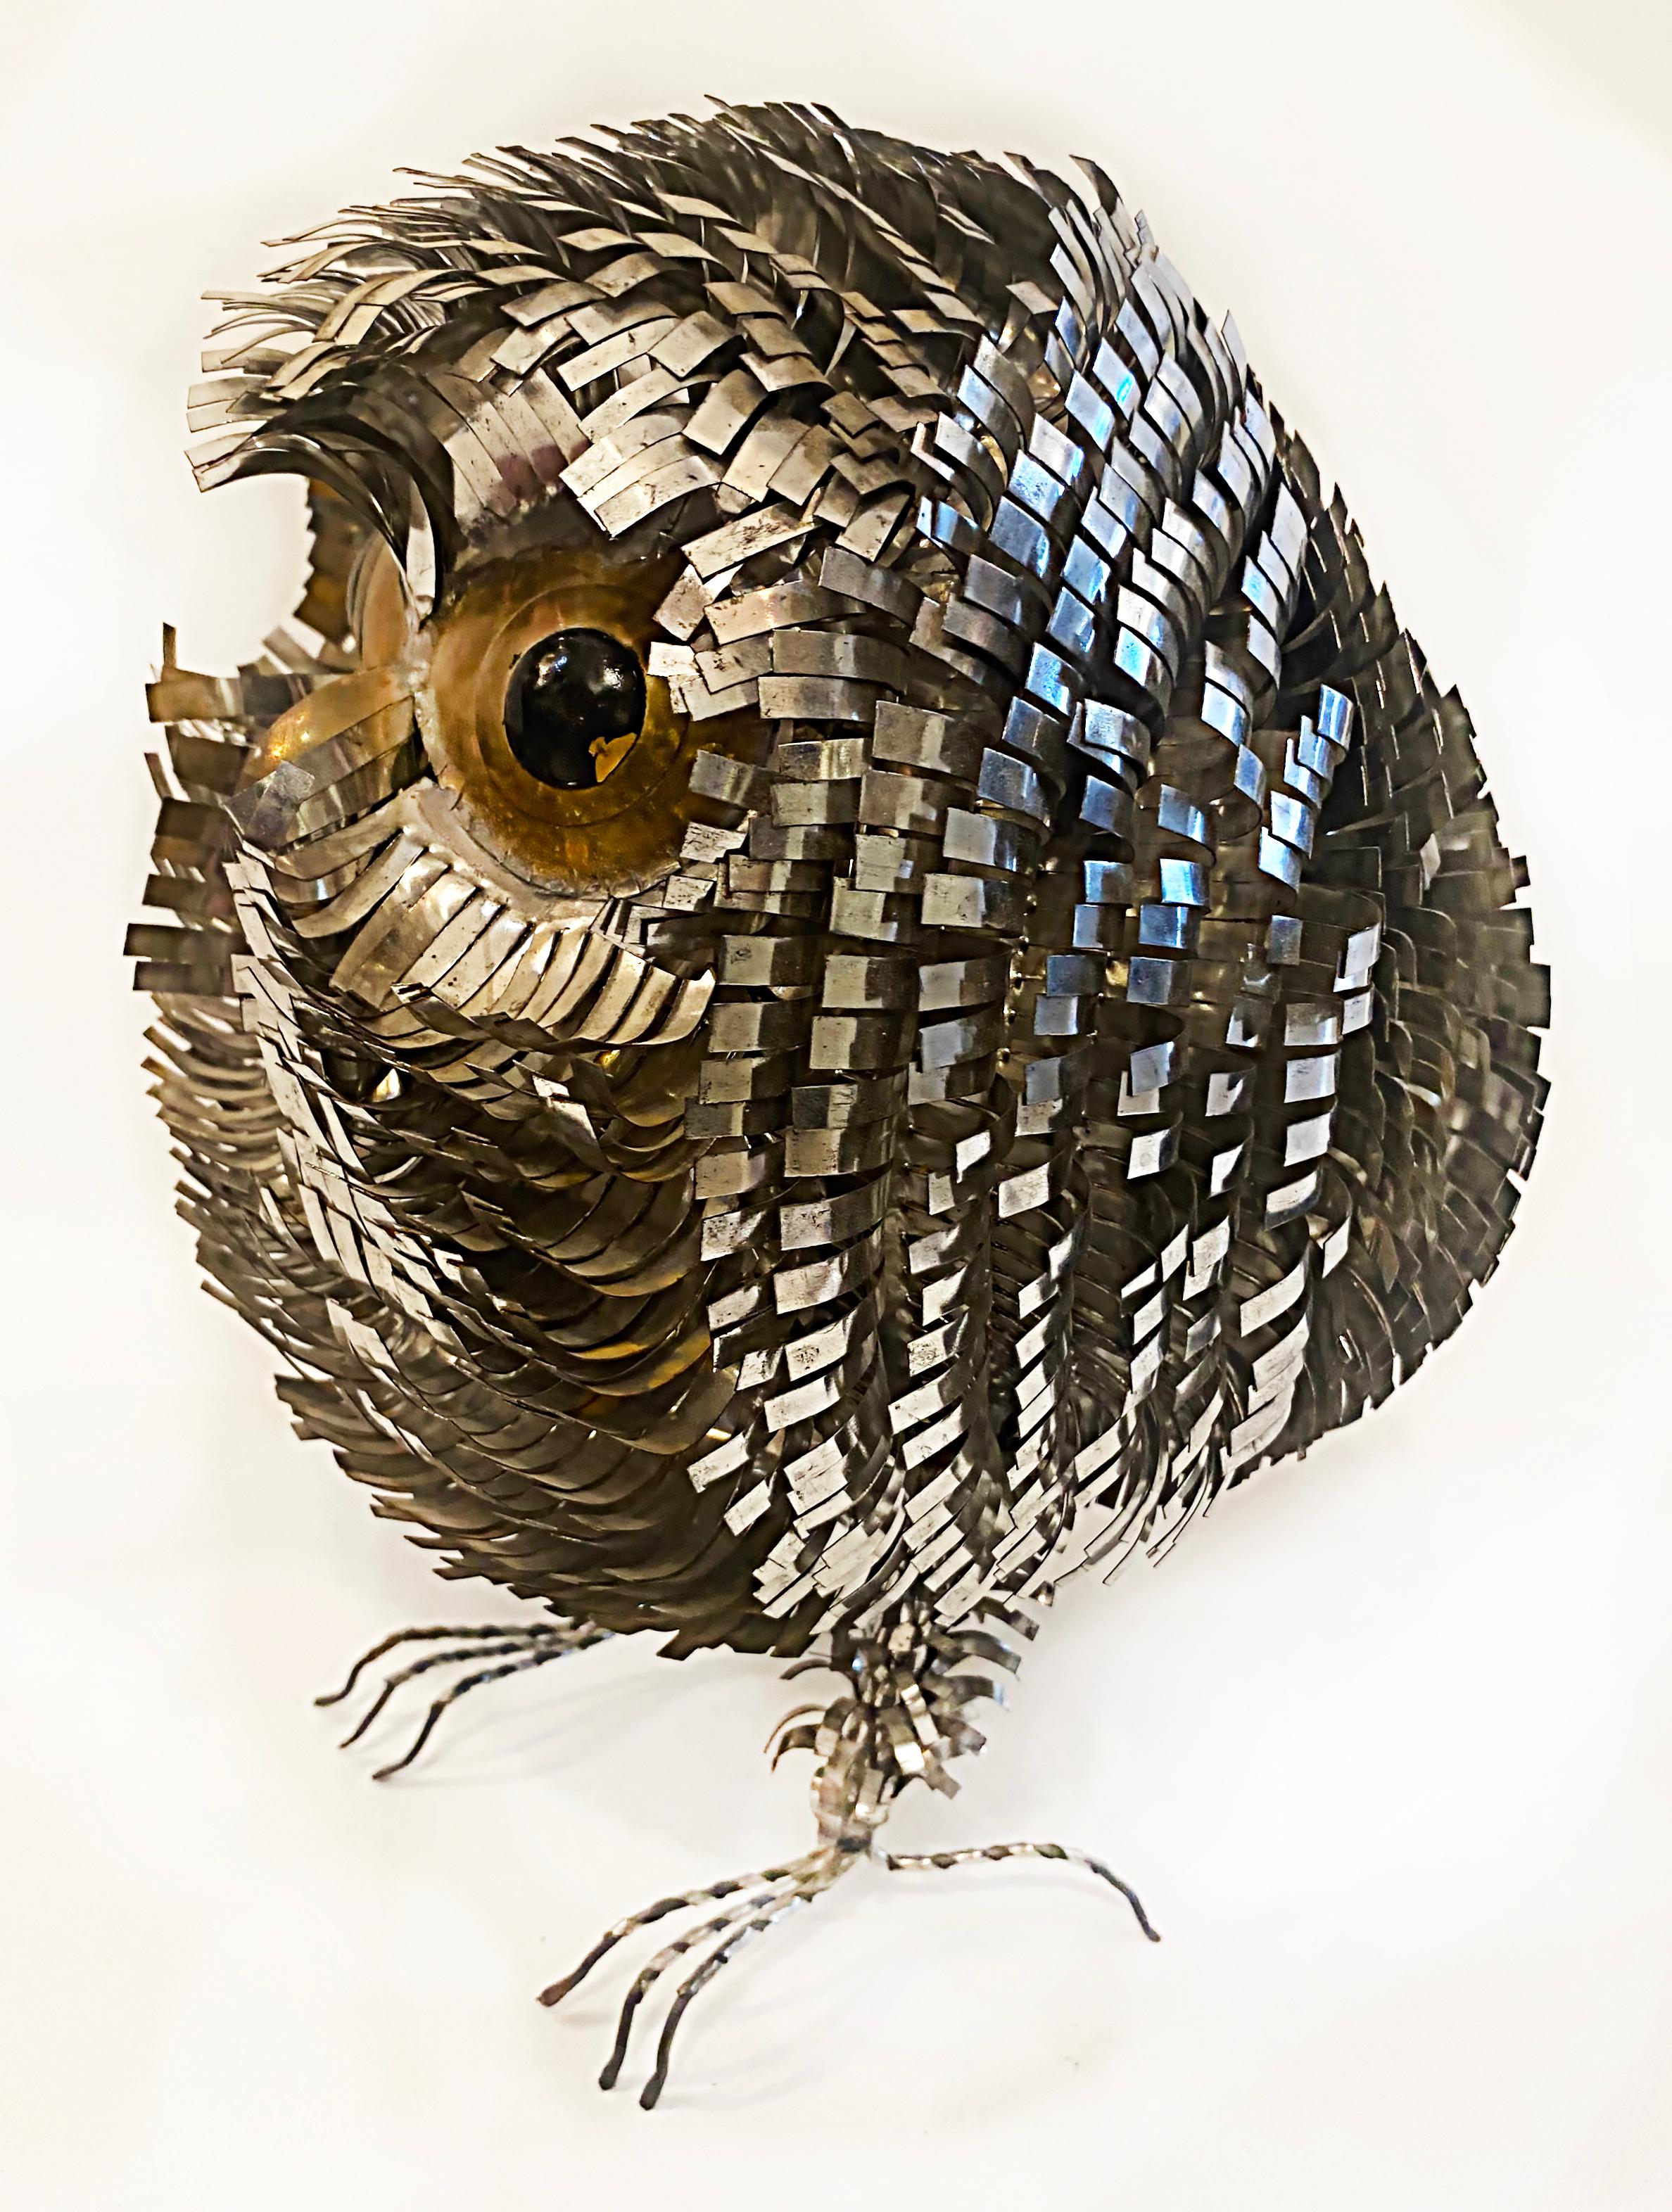 Sergio Bustamante Mexican midcentury baby owl sculpture, circa 1960s.

Offered for sale is a Sergio Bustamante Mexican Mid-Century Modern mixed metals sculpture of a baby owl c1960s. This wonderful intricately made sculpture combines brass and